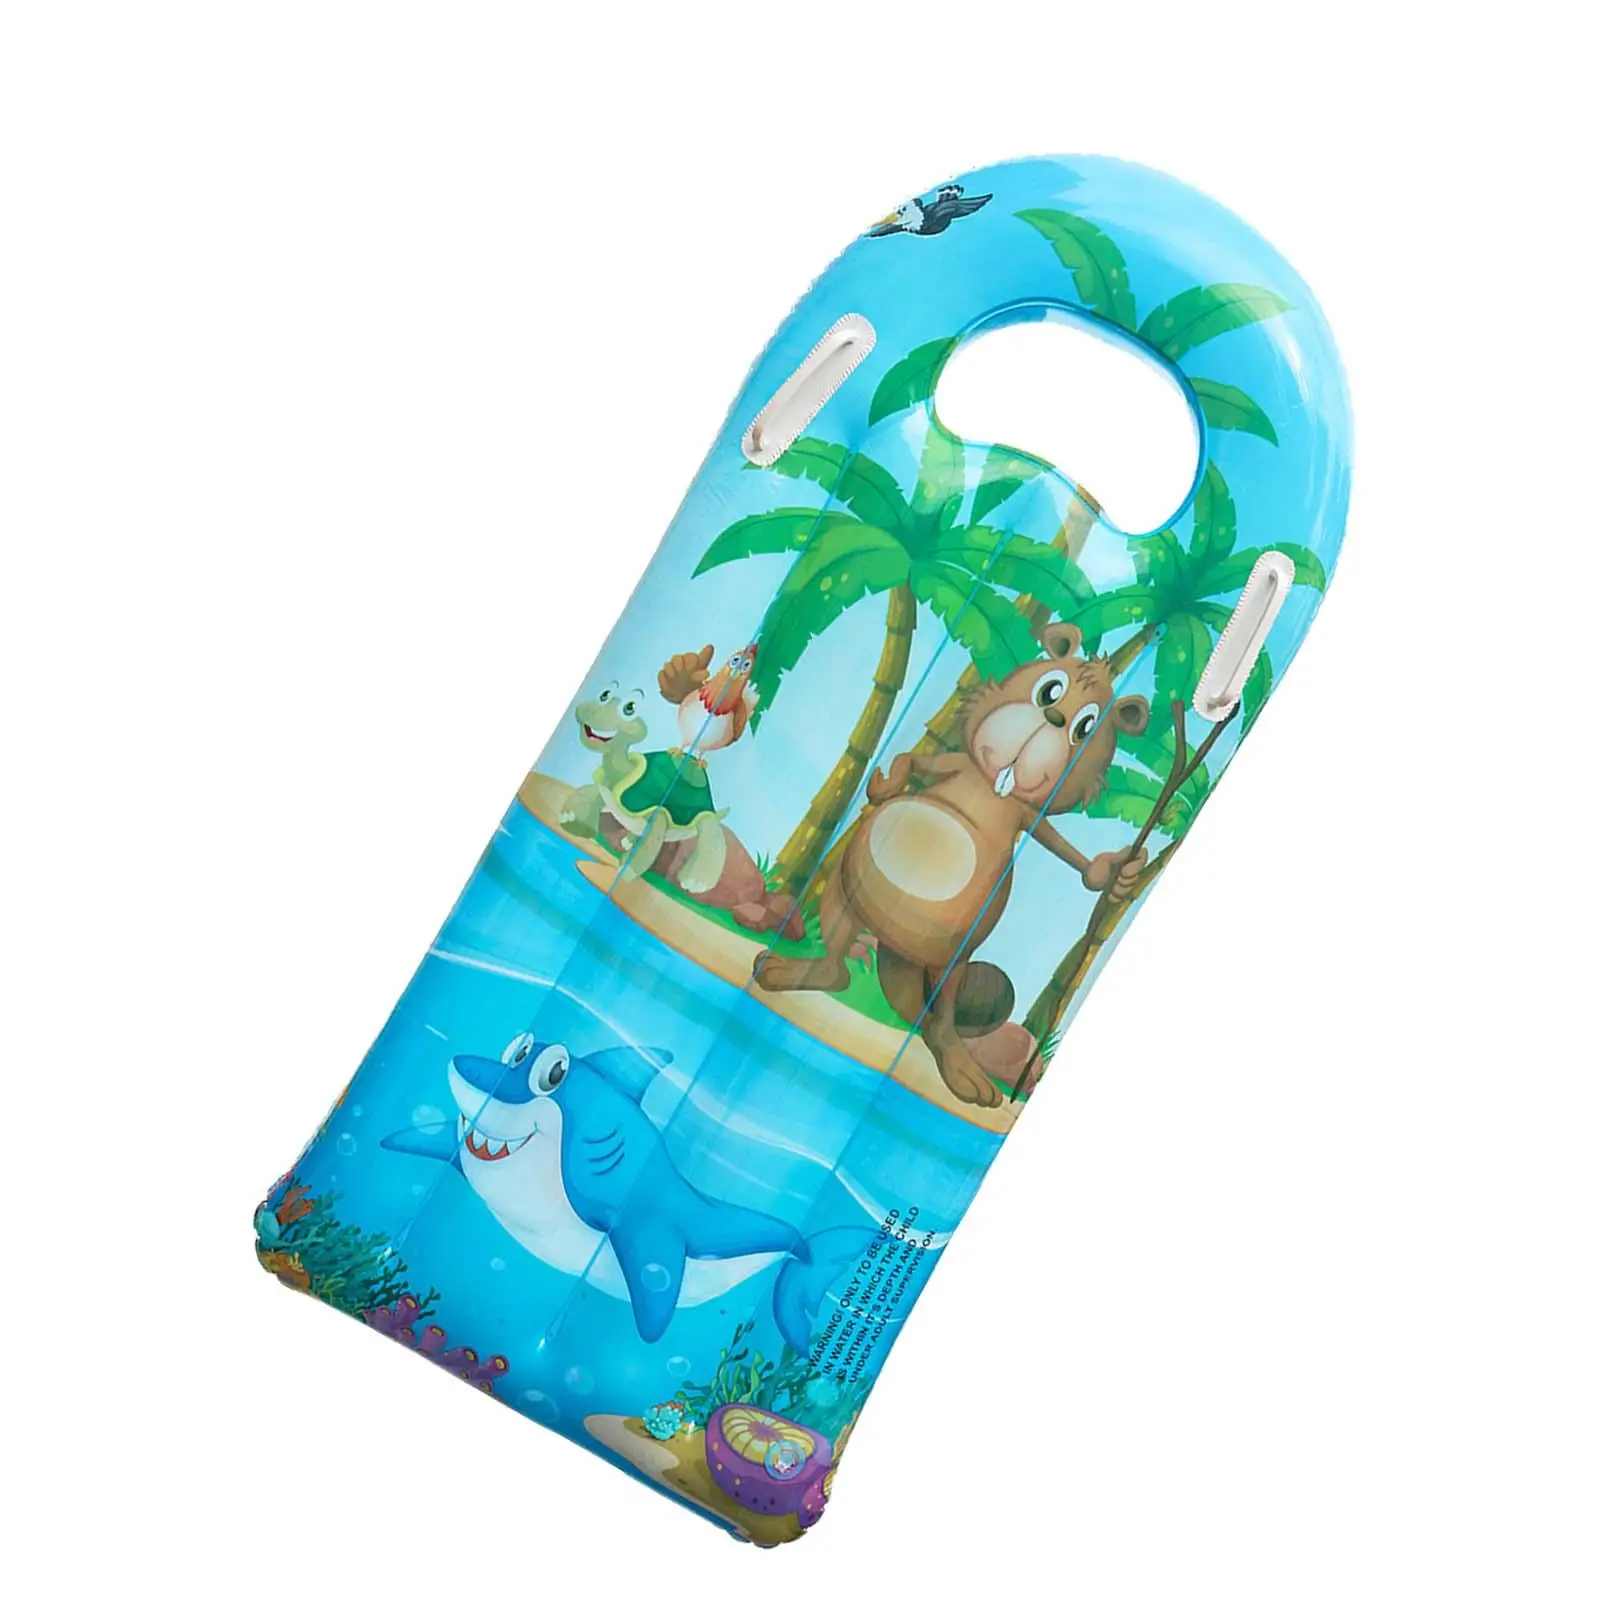 Inflatable Surfboard for Kids Floating Surfboard Pool Toy for Slip and Slide